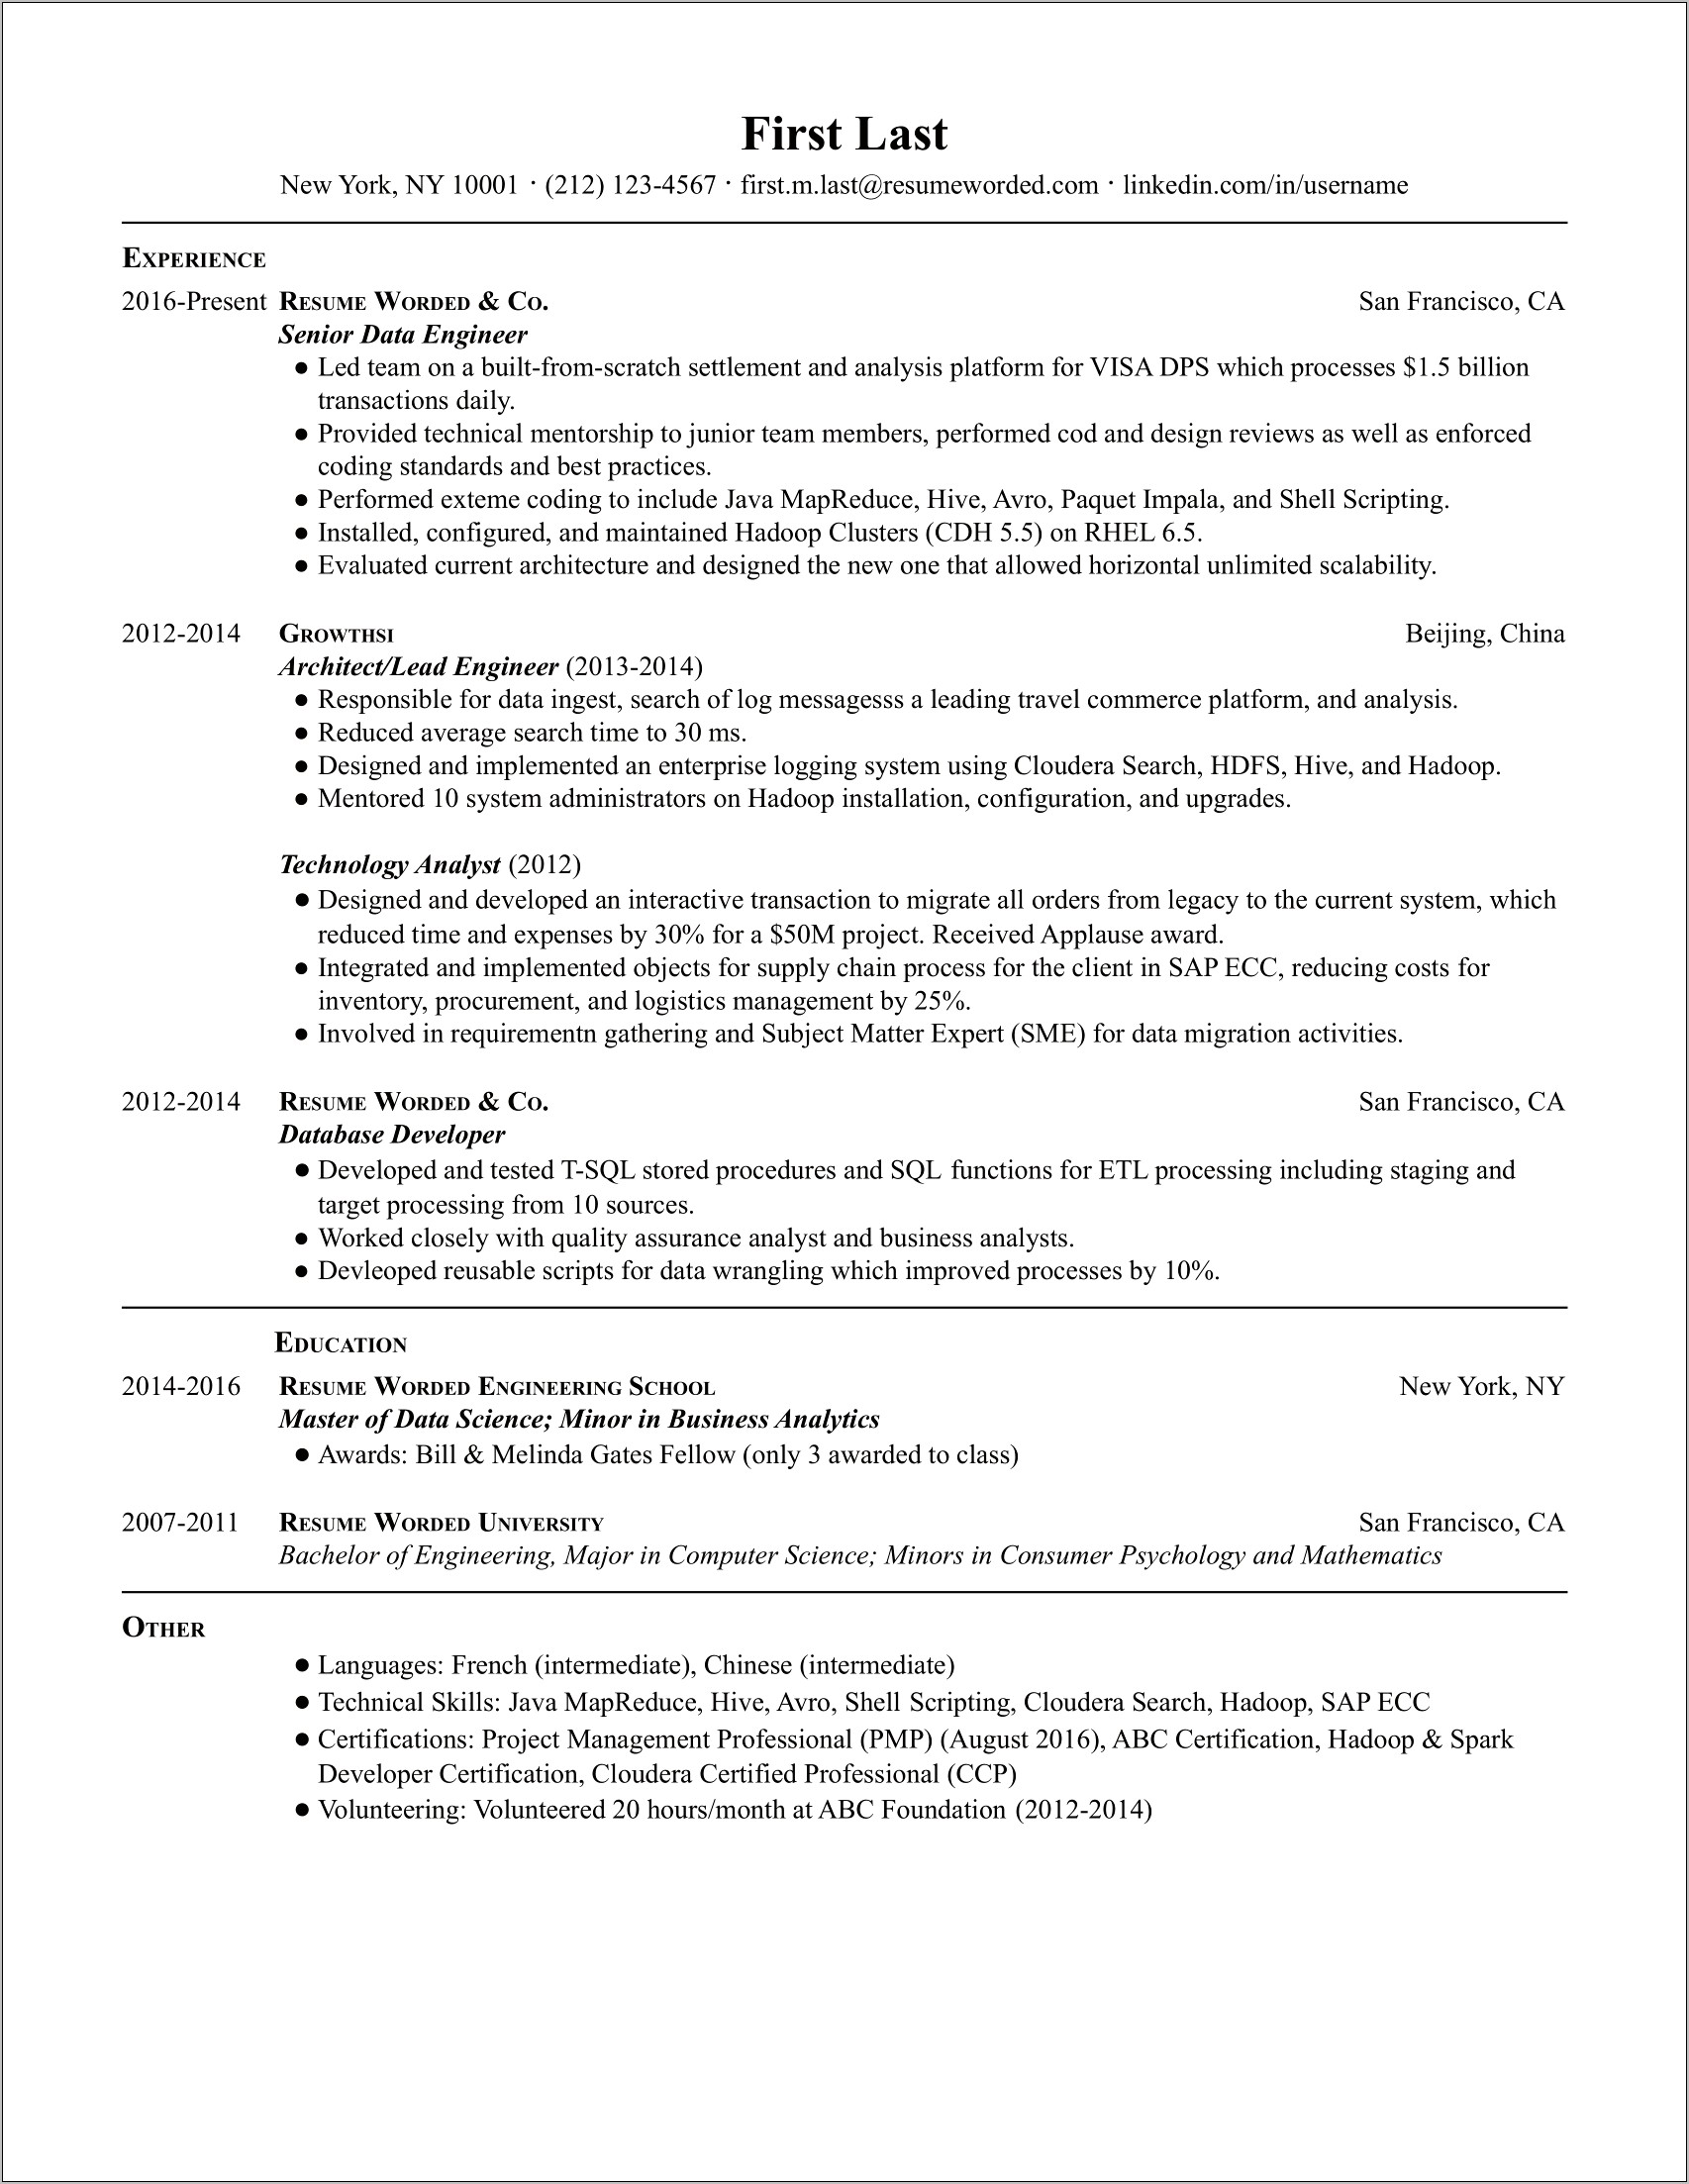 Etl Data Stage Experience In Resume